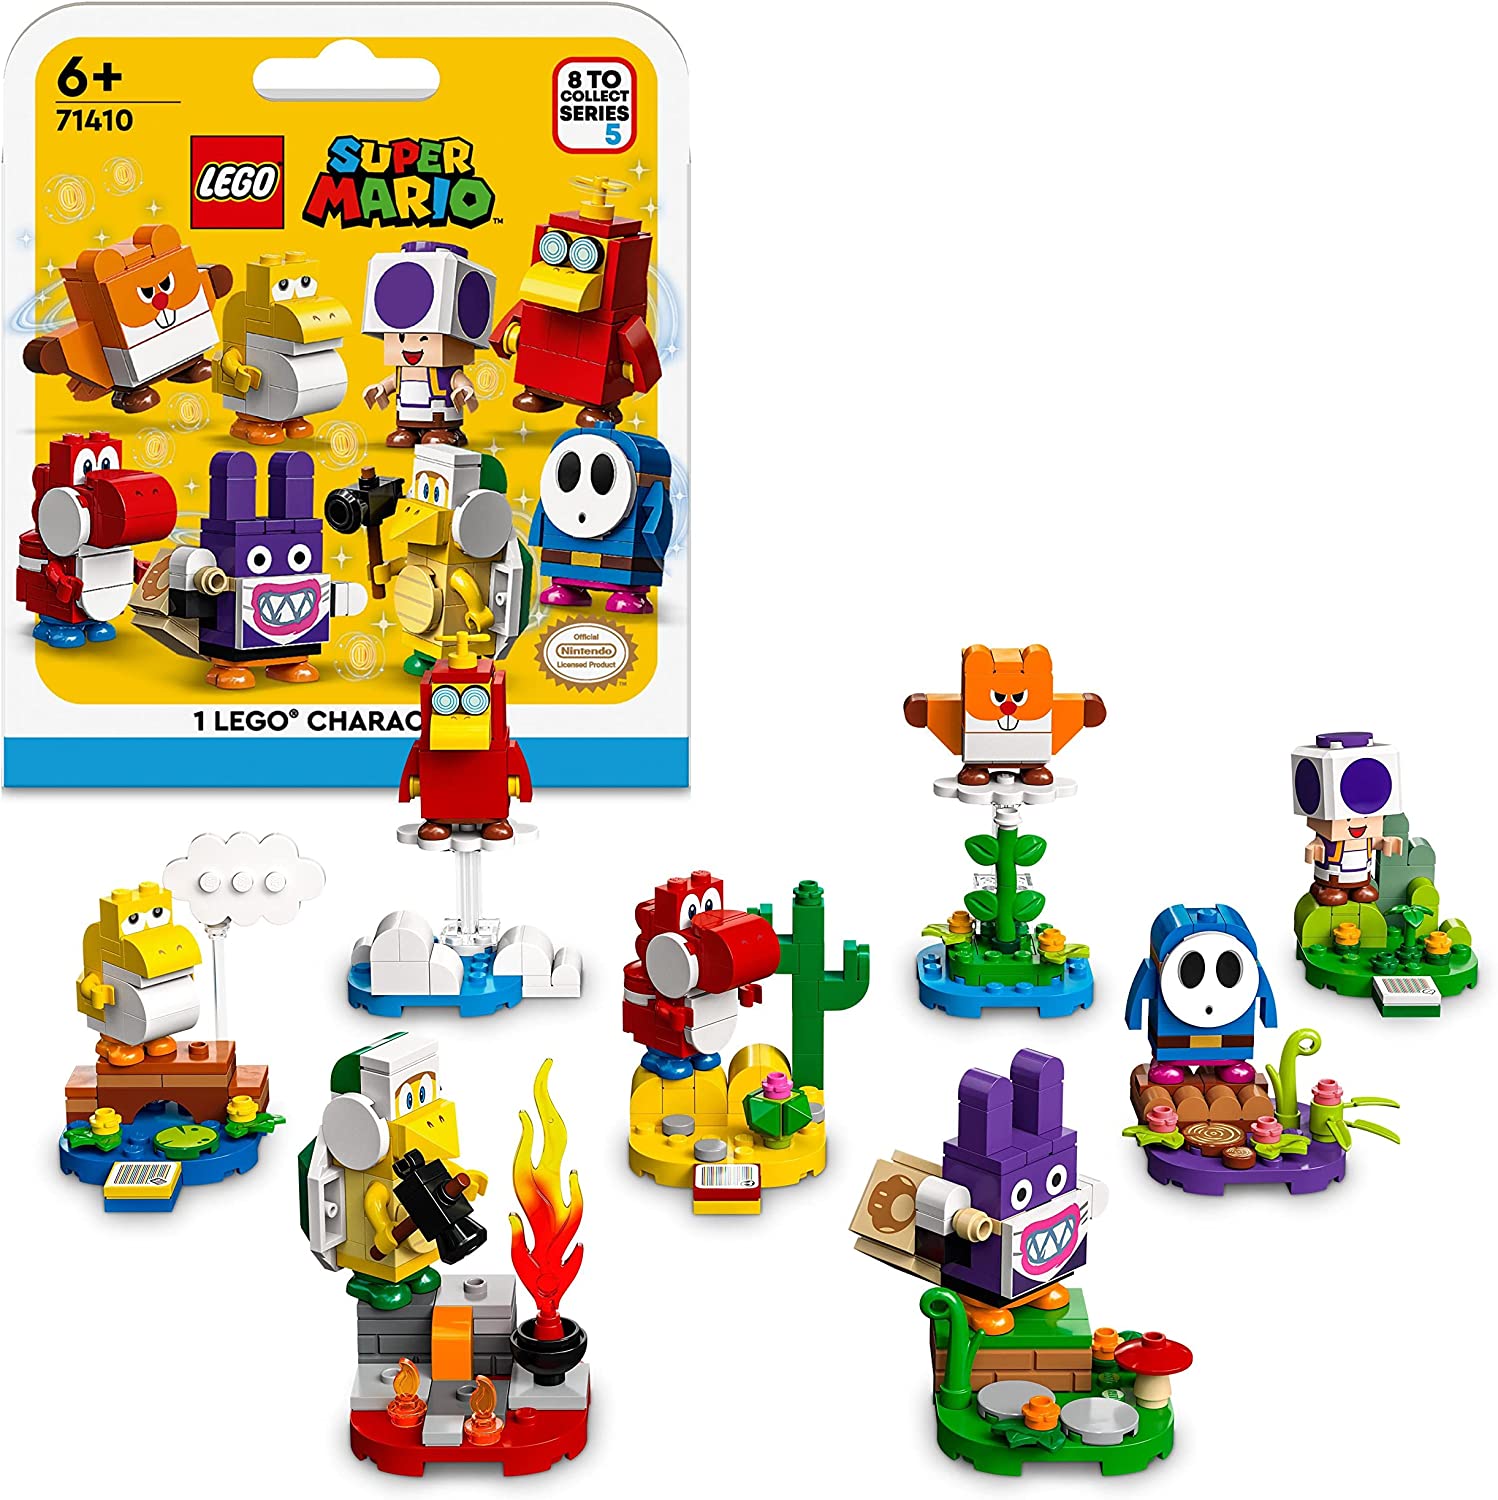 LEGO 71410 Super Mario Mario Characters Series 5, Collectable Toy Figures and Mystery Set with Stand (1 Random Model)